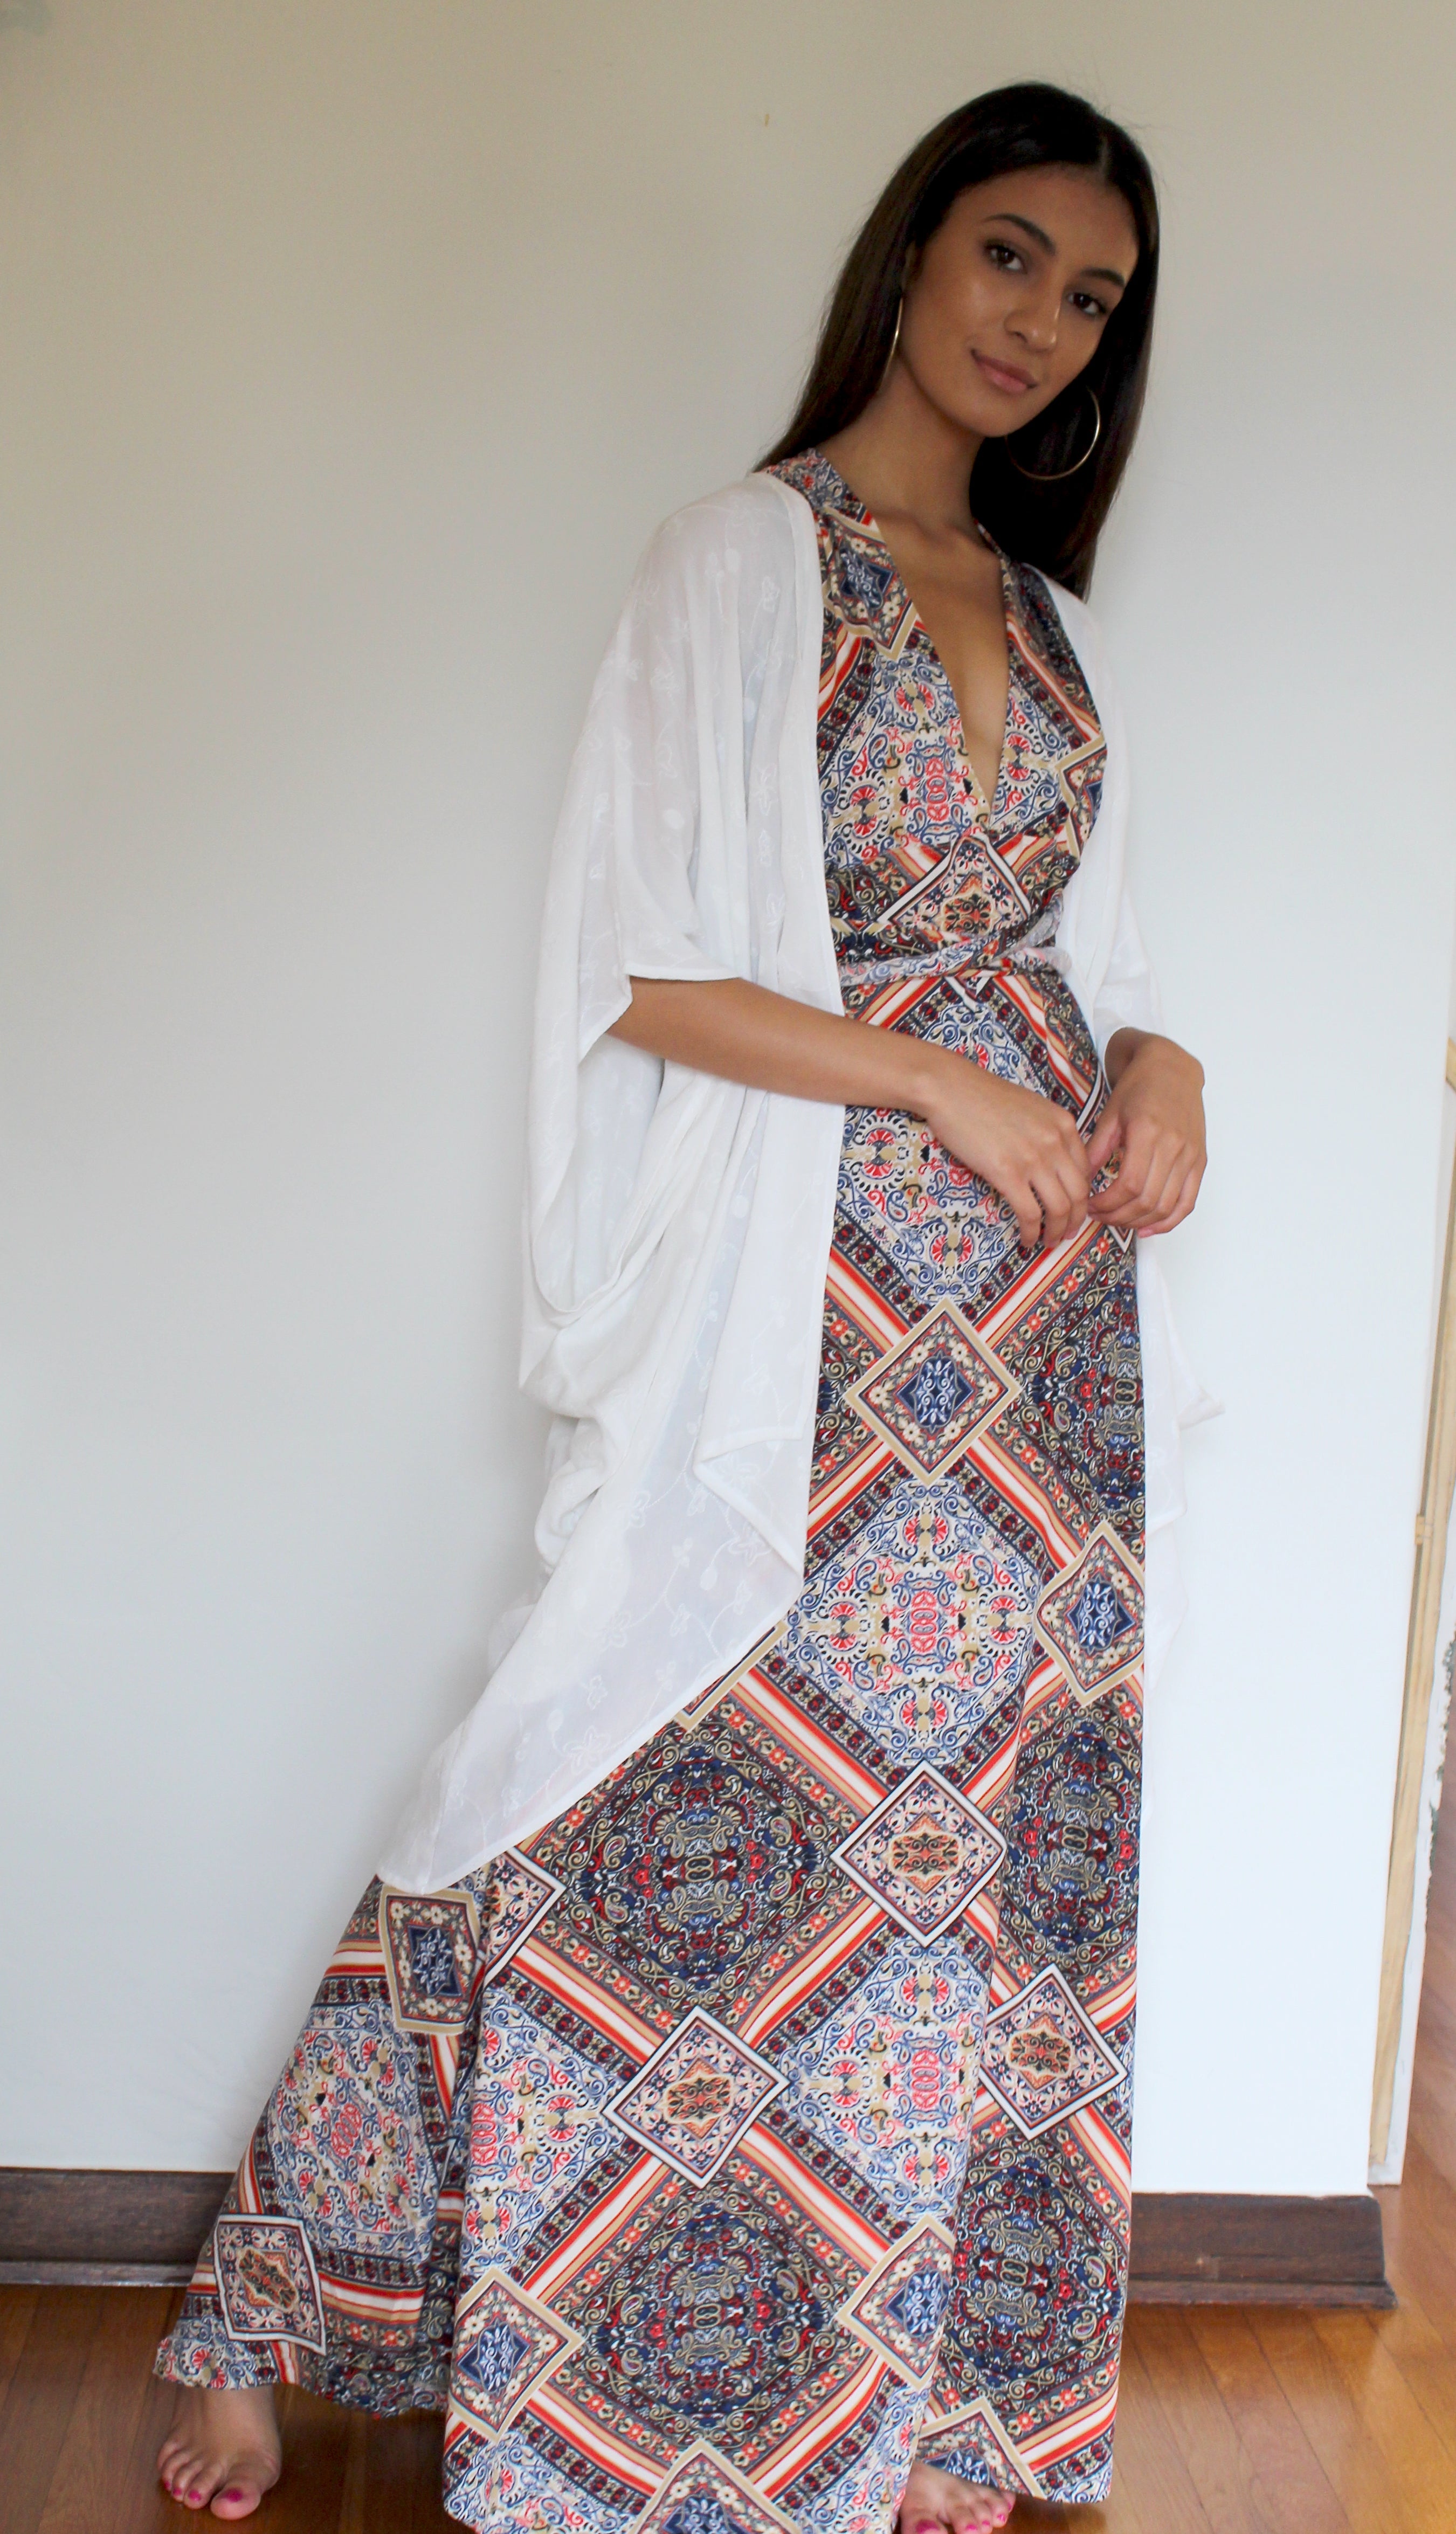 Persian Carpet Halter Dress - Yoga Clothing by Daughters of Culture